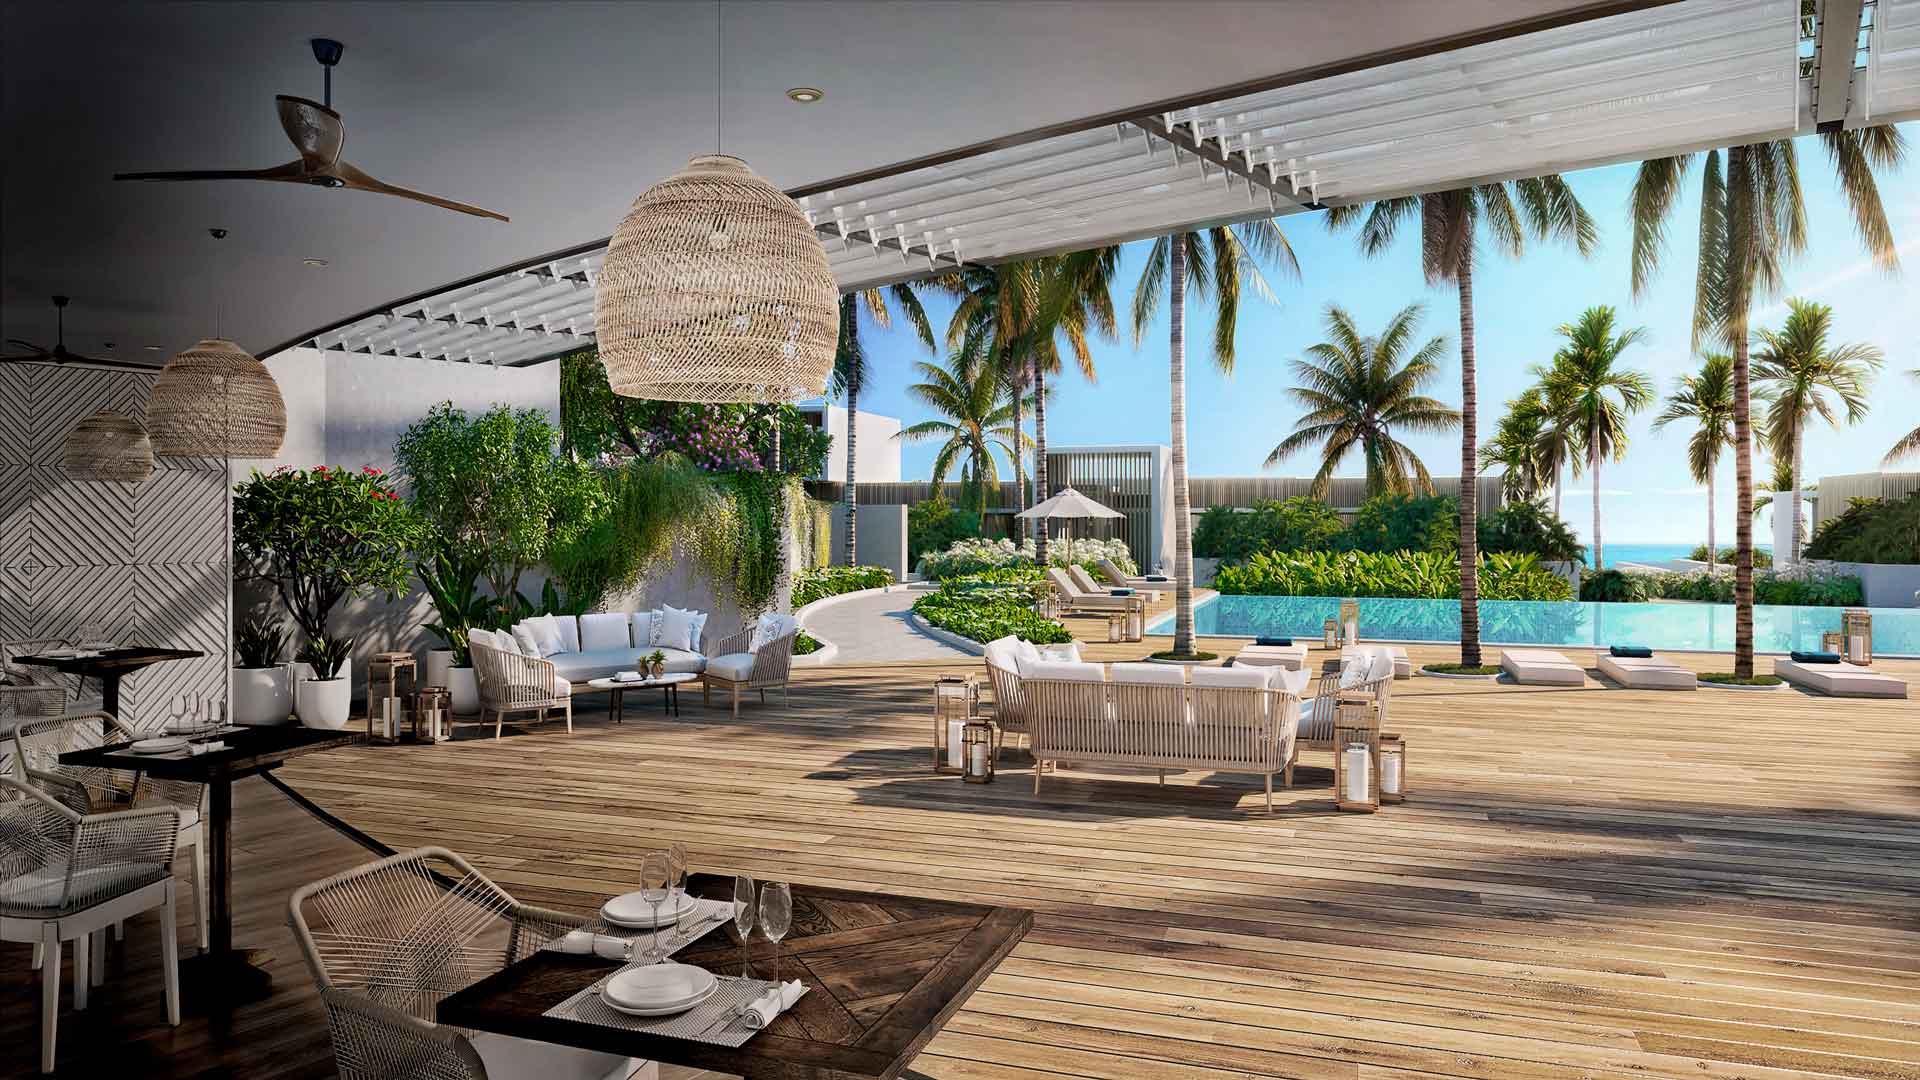 Buy a waterfront penthouse in Mauritius Invest in Mauritius Buy a penthouse in Mauritius westimmo luxury real estate mauritius